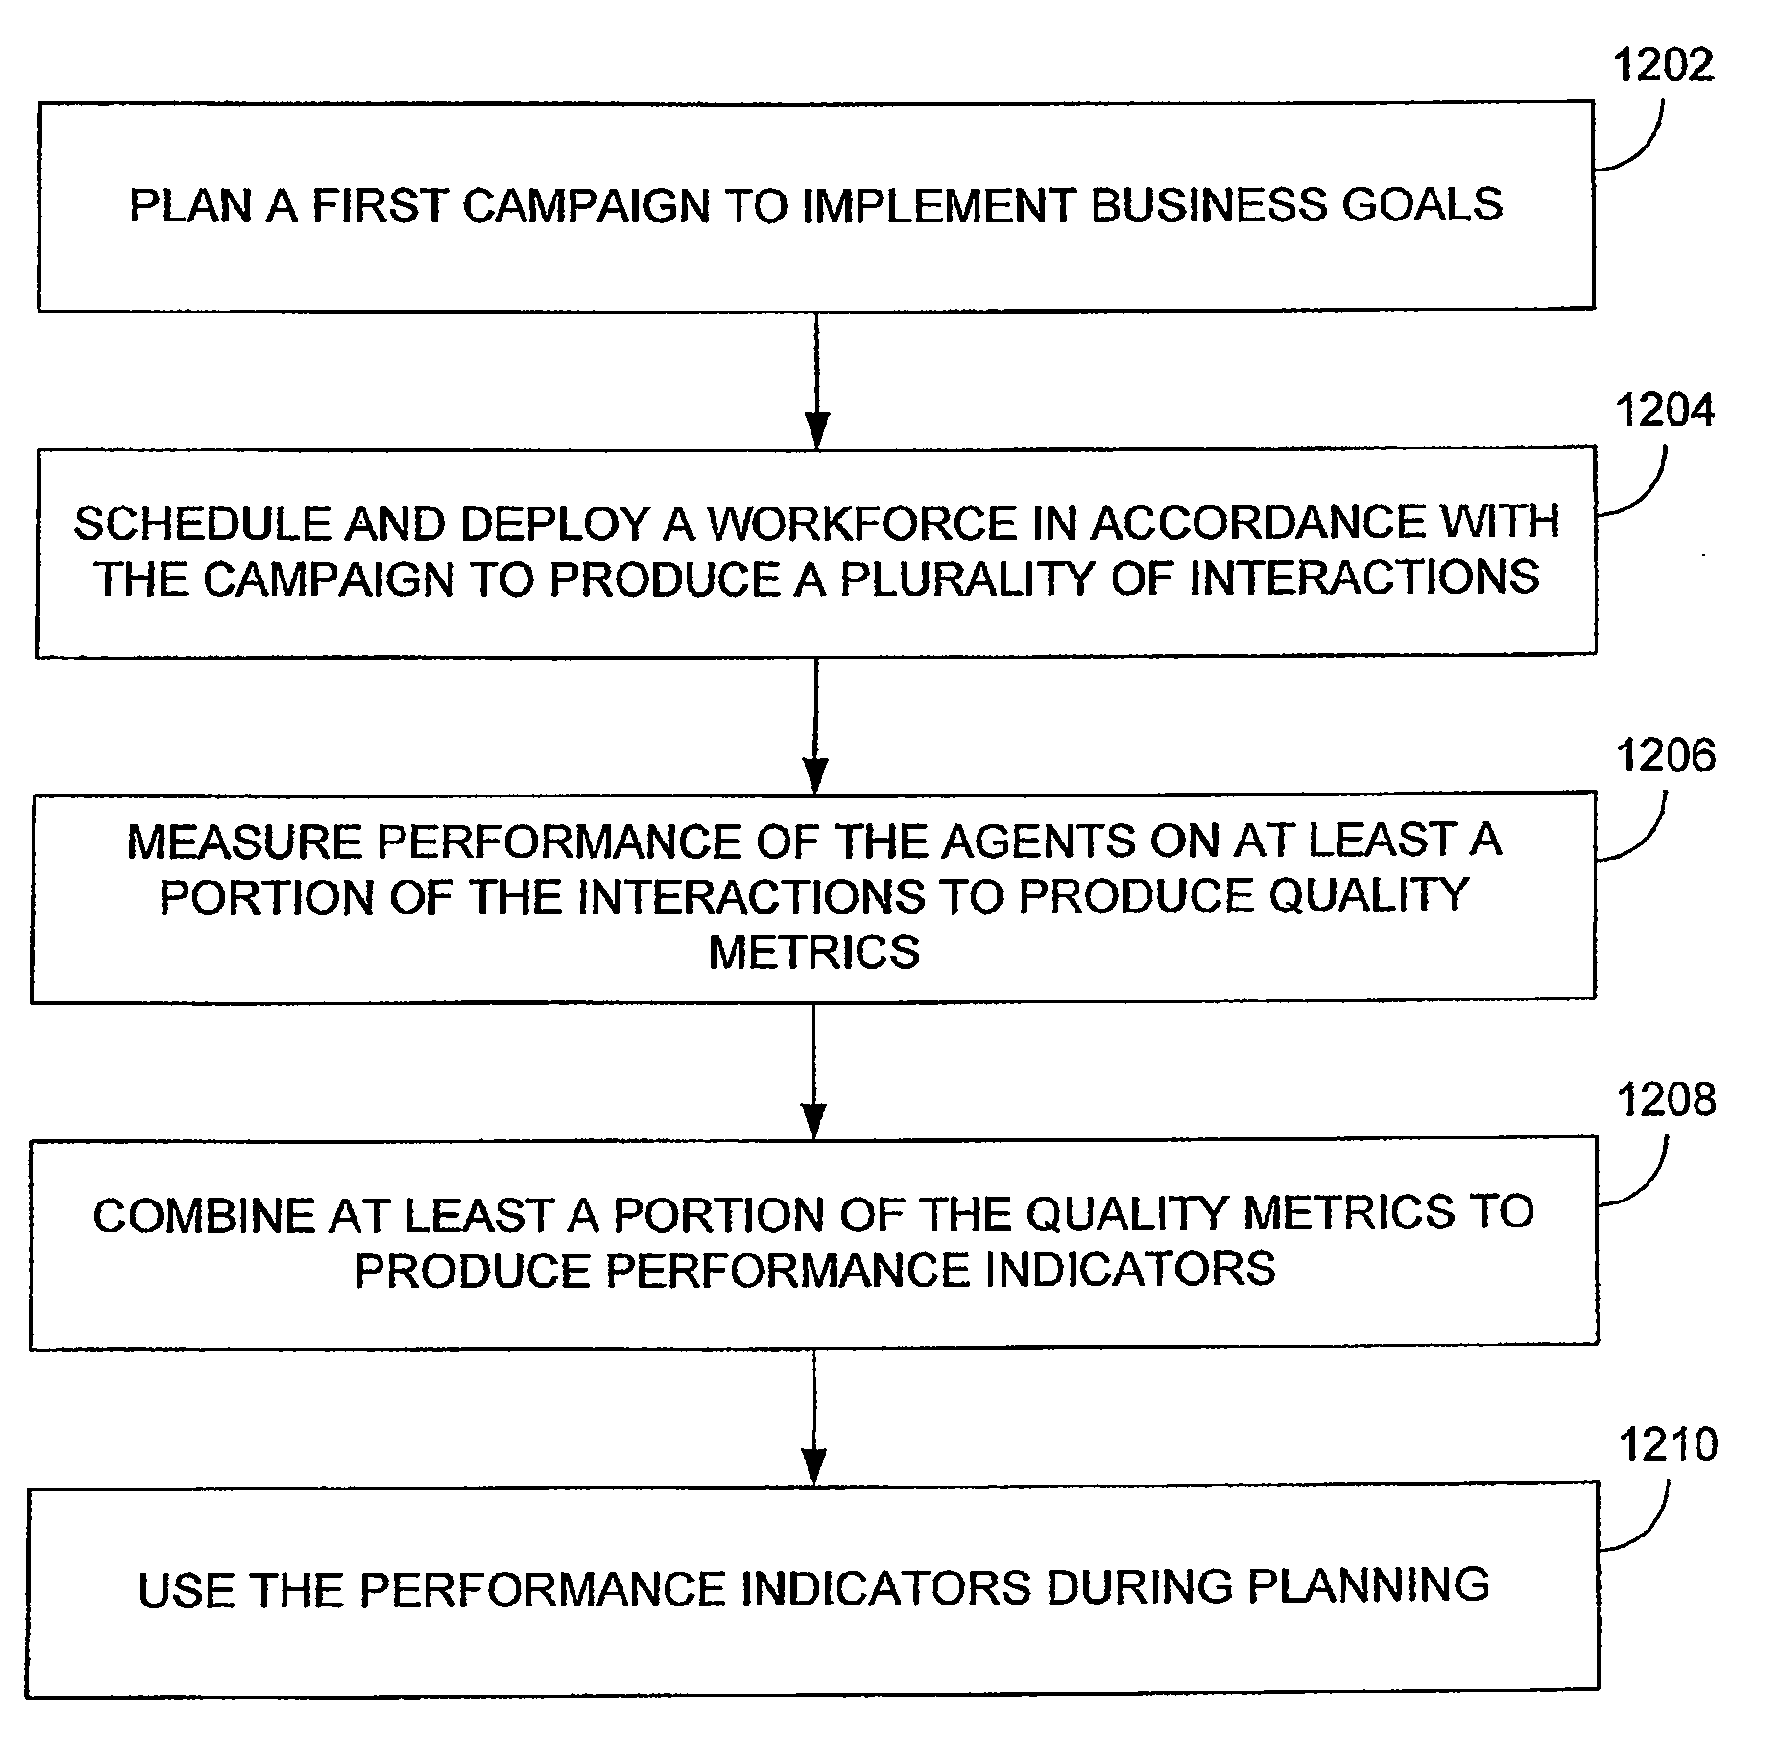 Systems and methods for providing workforce optimization to branch and back offices